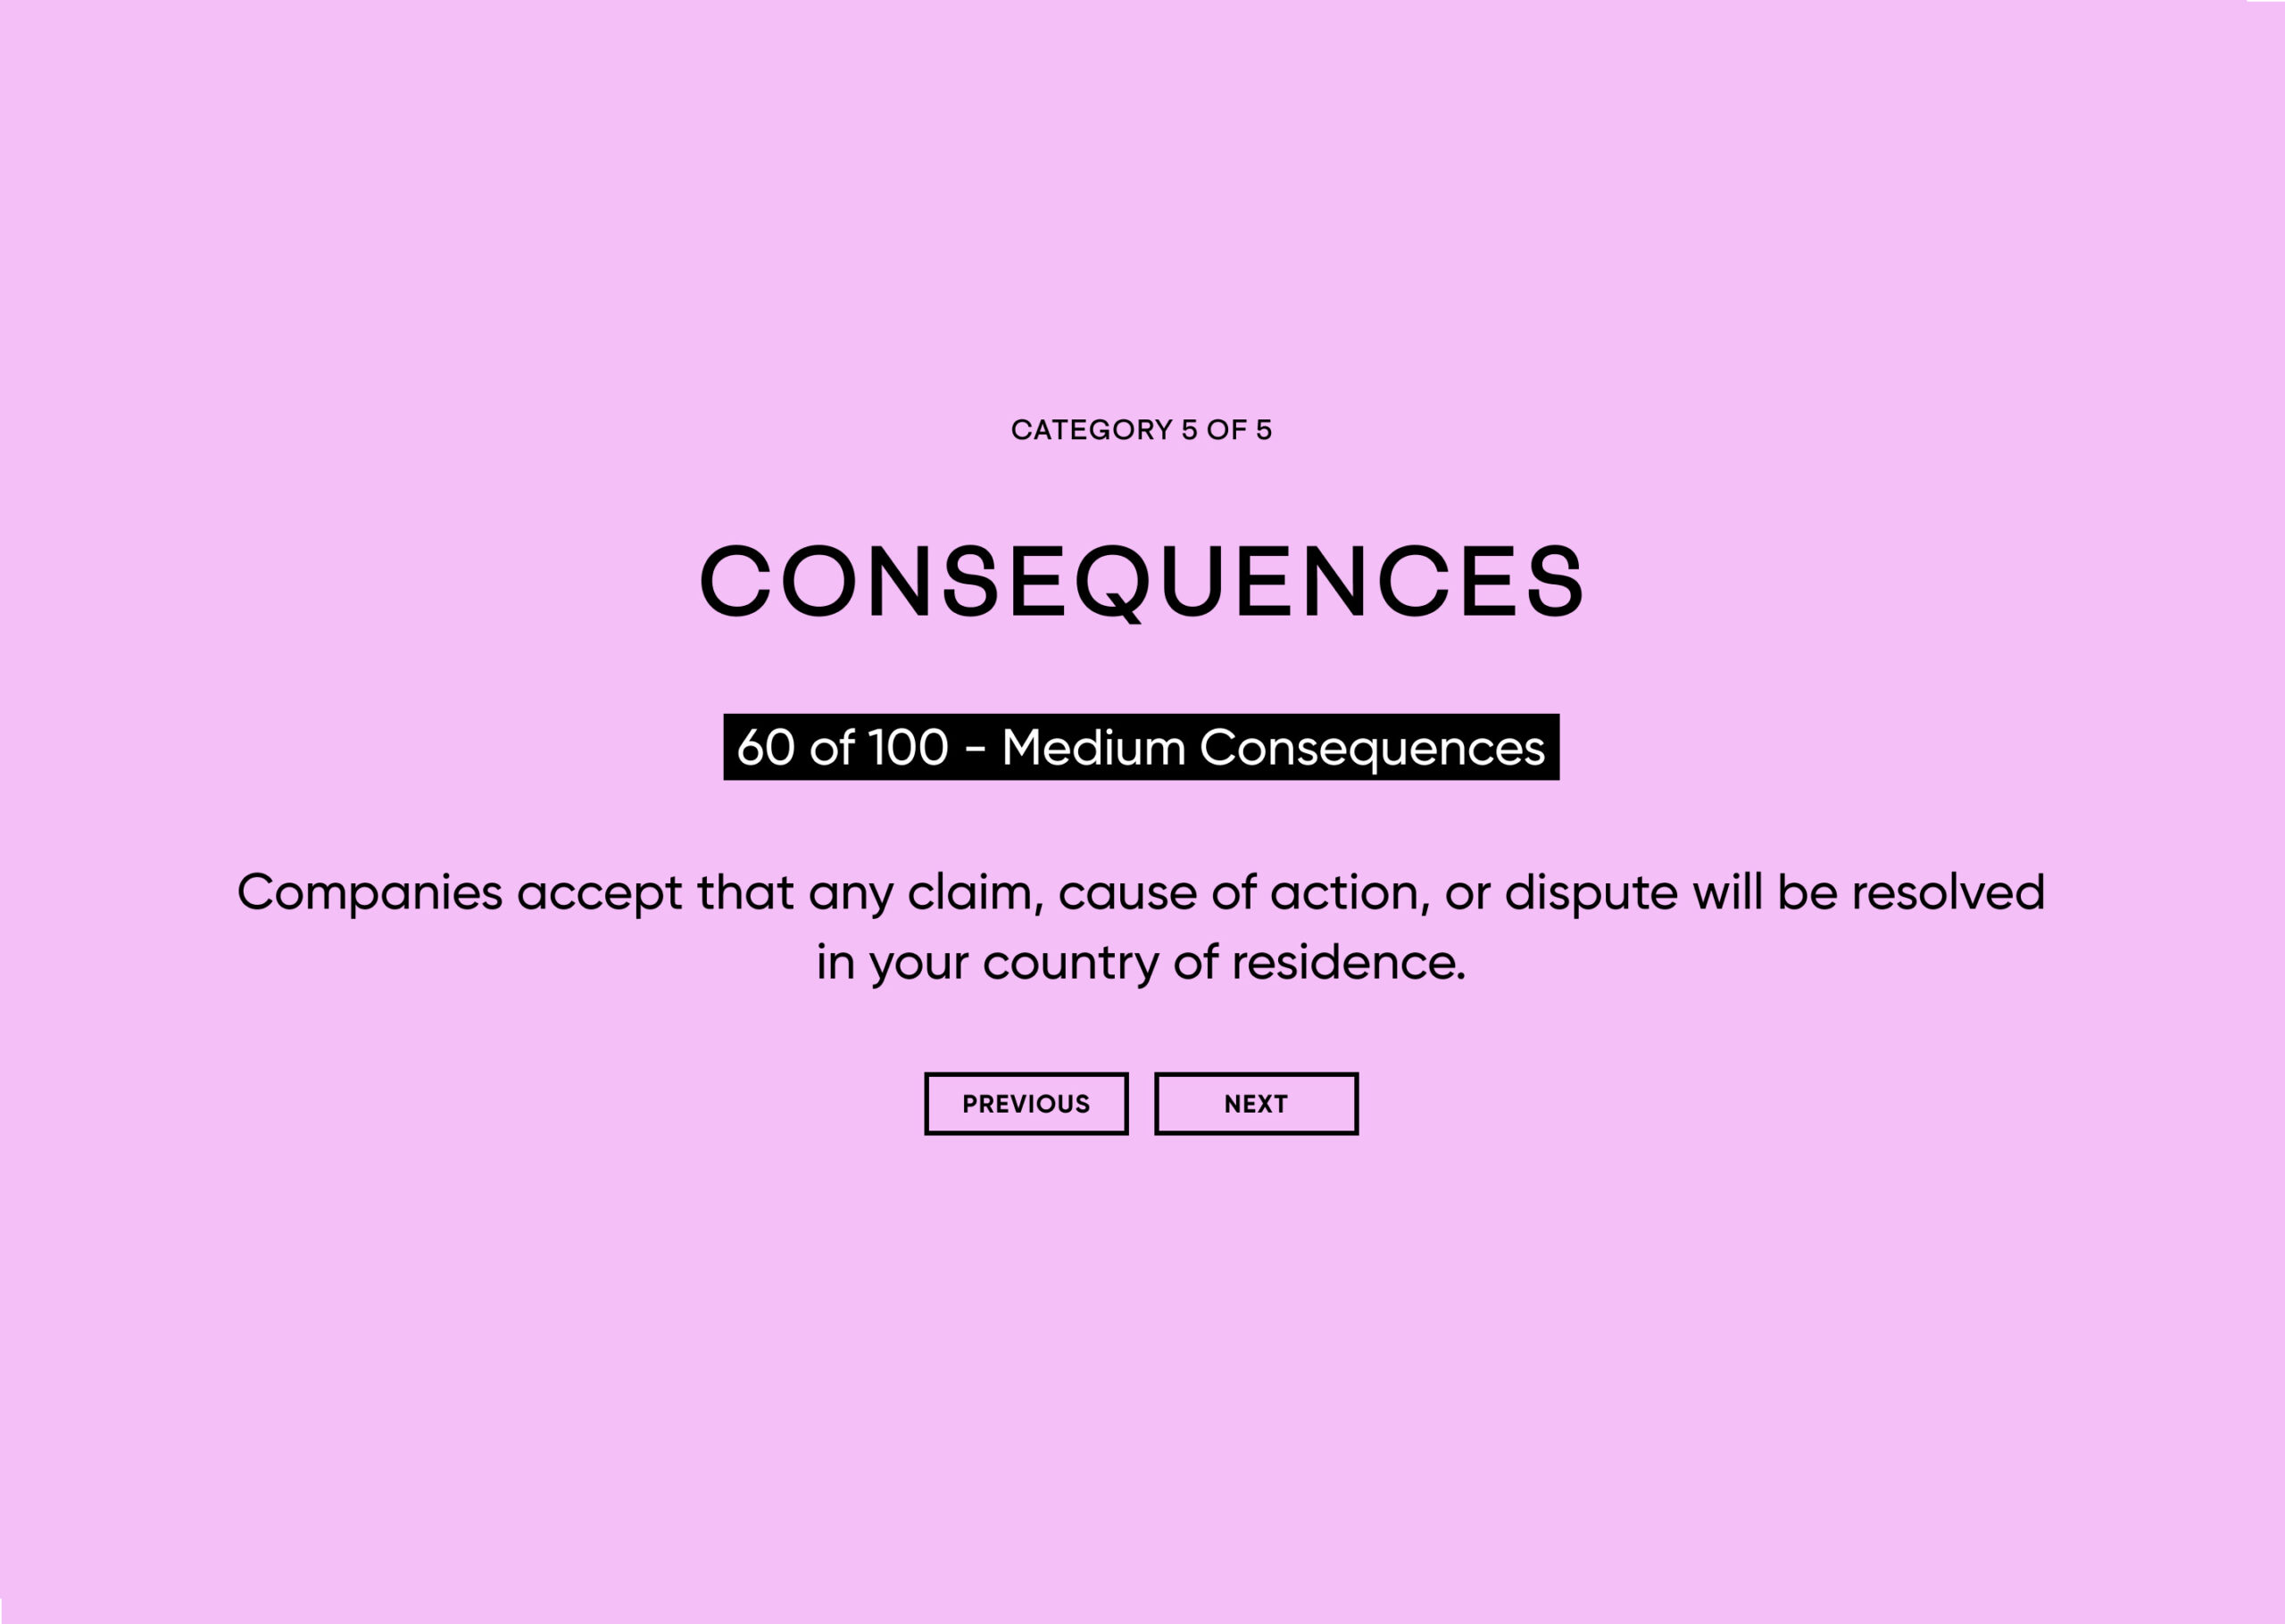 5 – Consequences